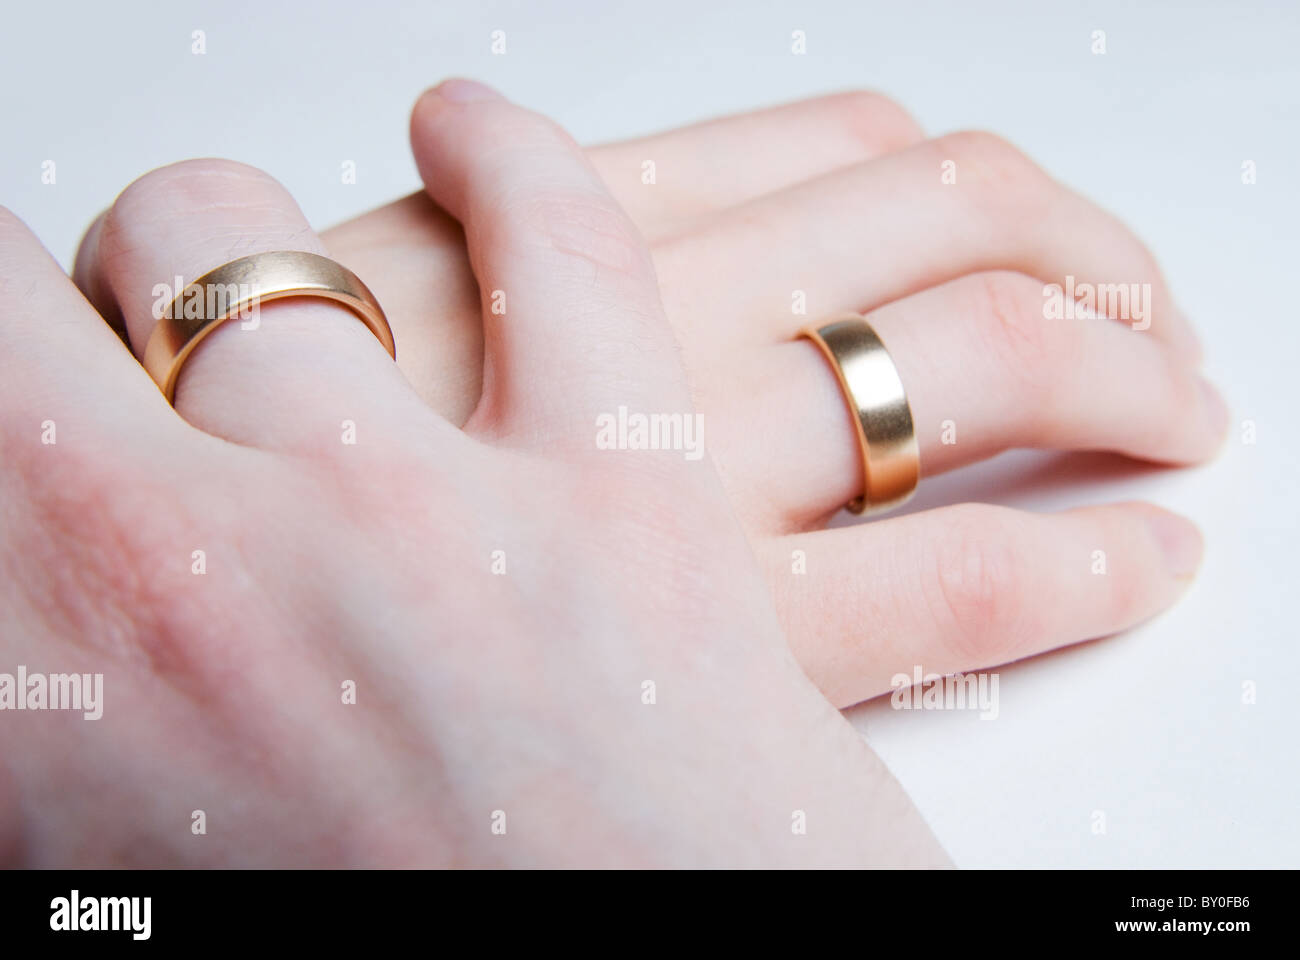 The hand of a man is gently holding the hand of a woman, both wearing golden wedding rings Stock Photo